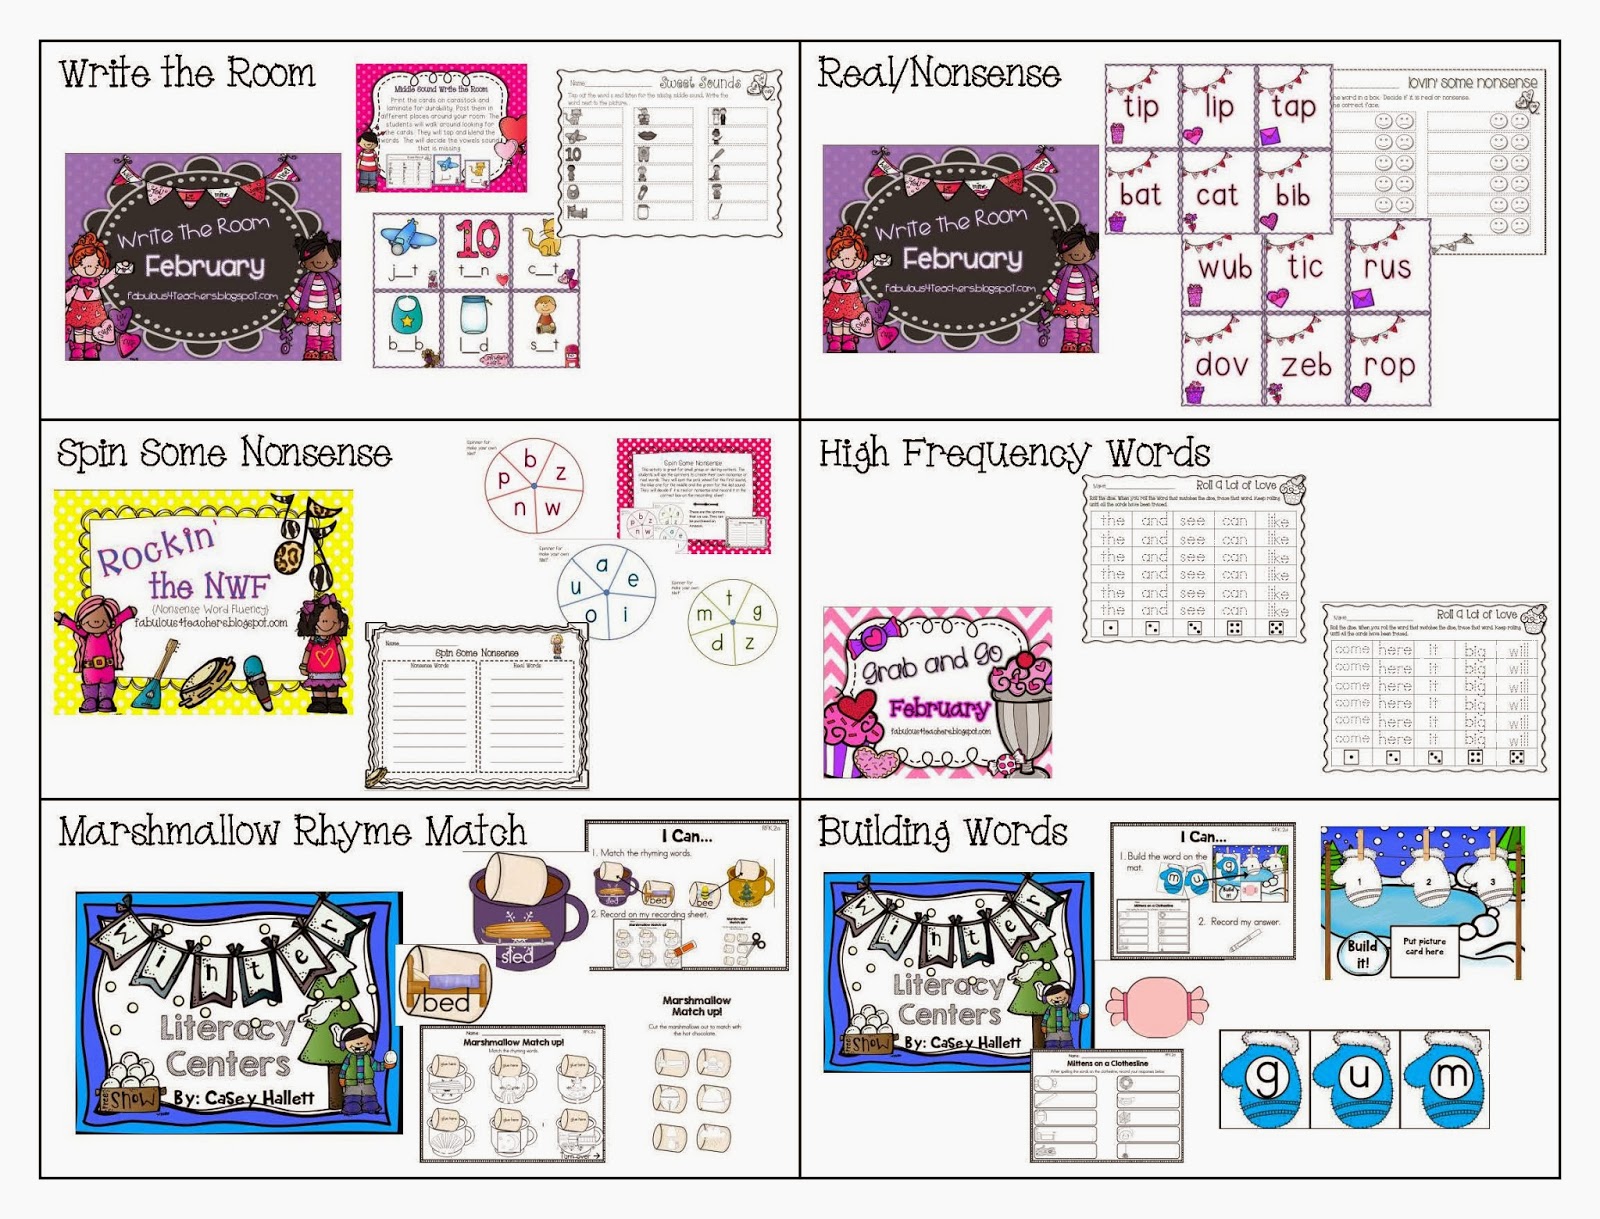  Fab4 Lesson Plans for the Week of February 10, 2014